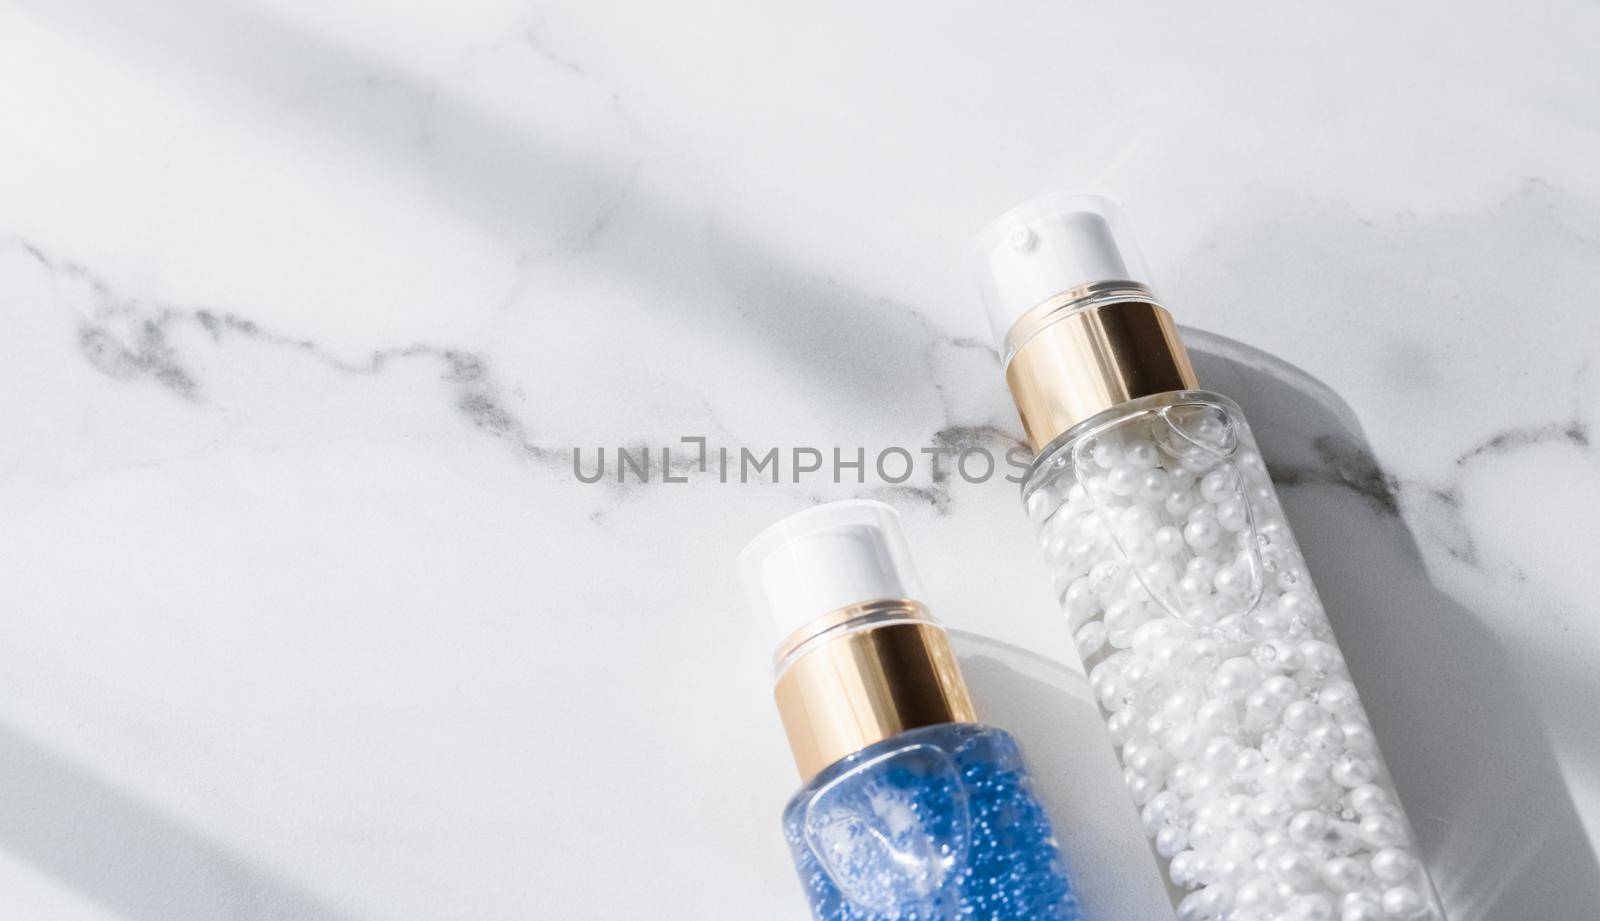 Cosmetic branding, packaging and make-up concept - Skin care serum and gel bottle, moisturizing lotion and lifting cream emulsion on marble, anti-age cosmetics for luxury beauty skincare brand design